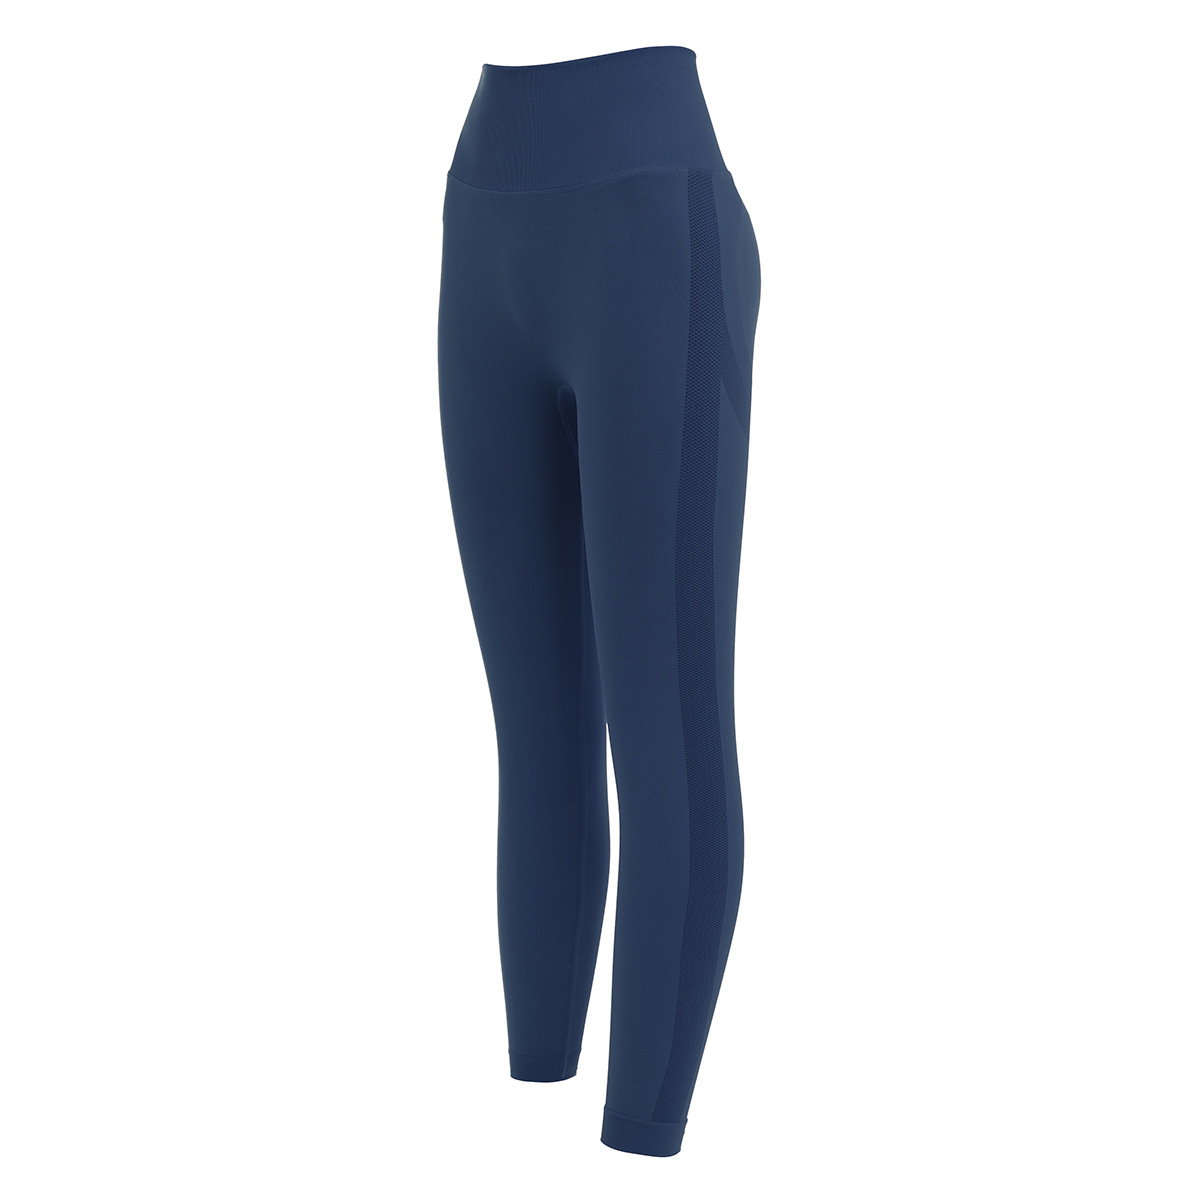 Womens high quality workout yoga leggings pants in navy blue